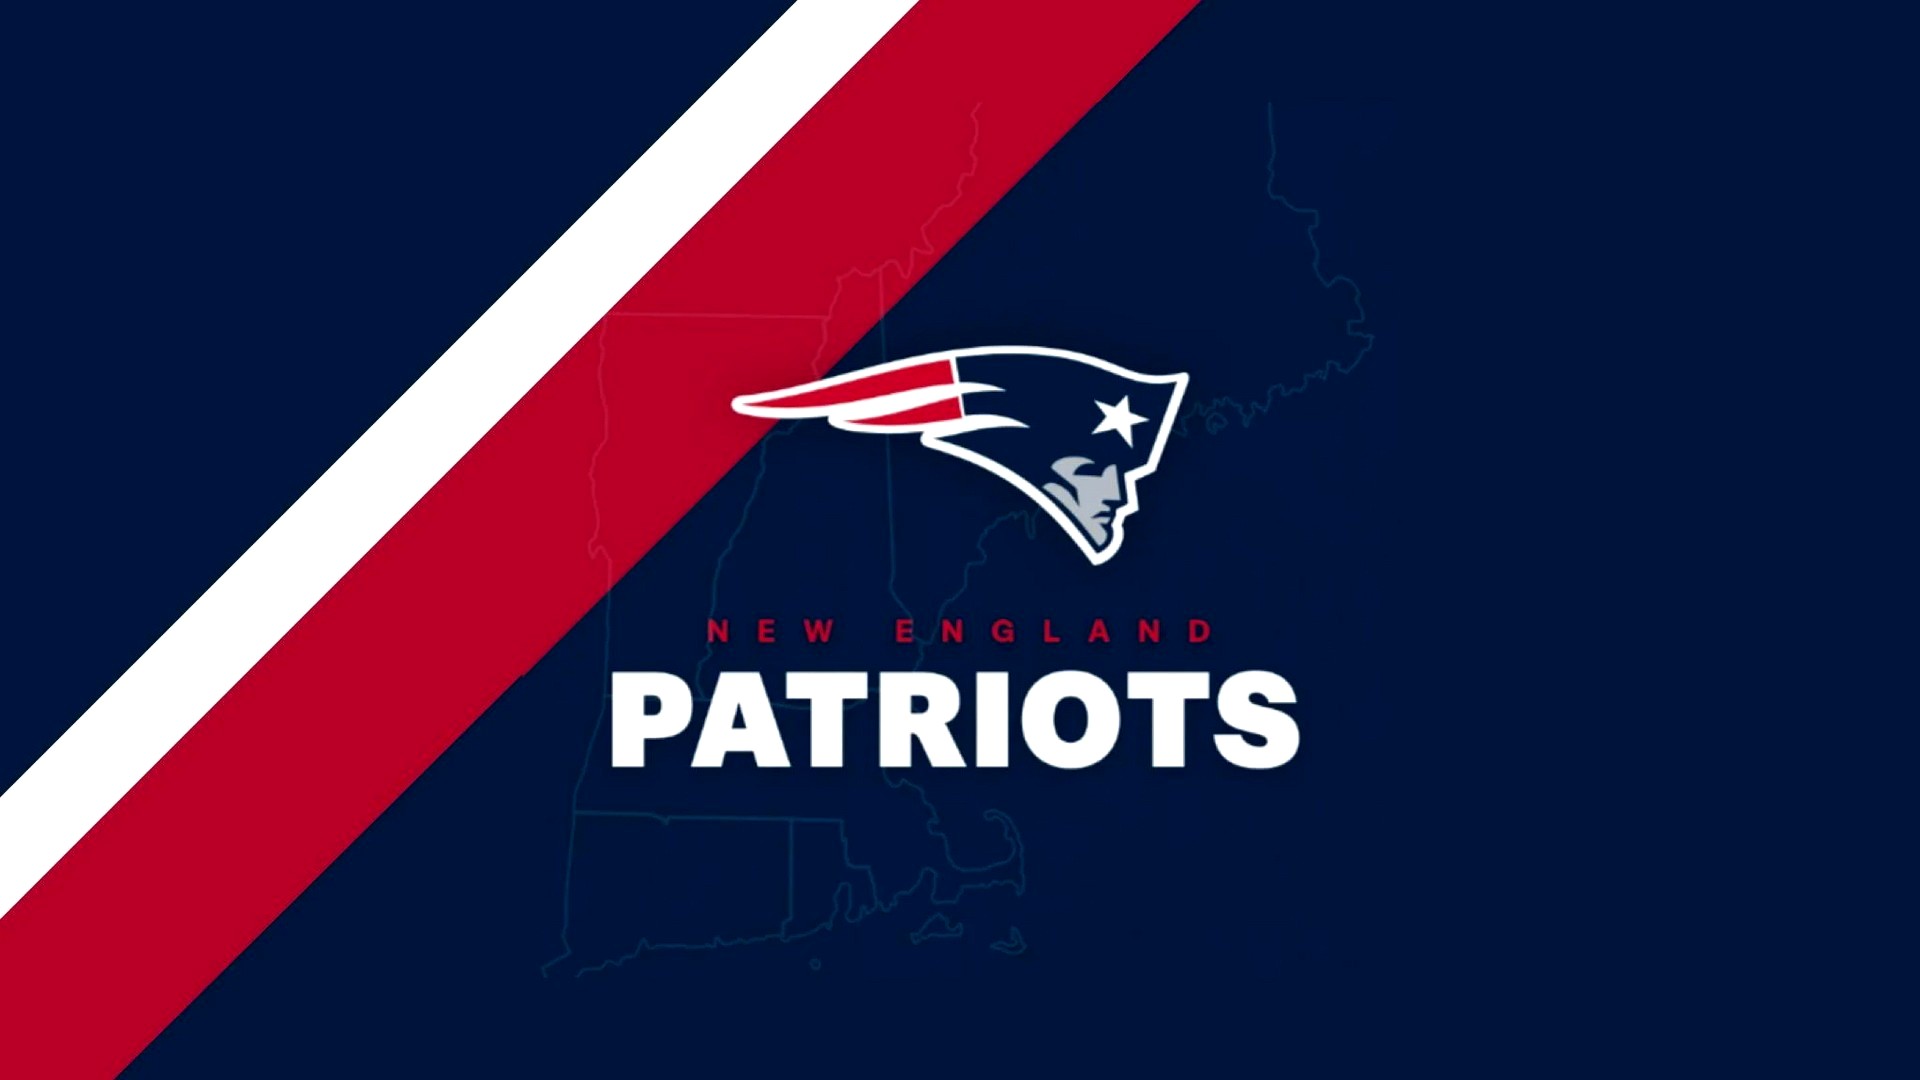 New England Patriots Wallpaper HD with high-resolution 1920x1080 pixel. You can use and set as wallpaper for Notebook Screensavers, Mac Wallpapers, Mobile Home Screen, iPhone or Android Phones Lock Screen